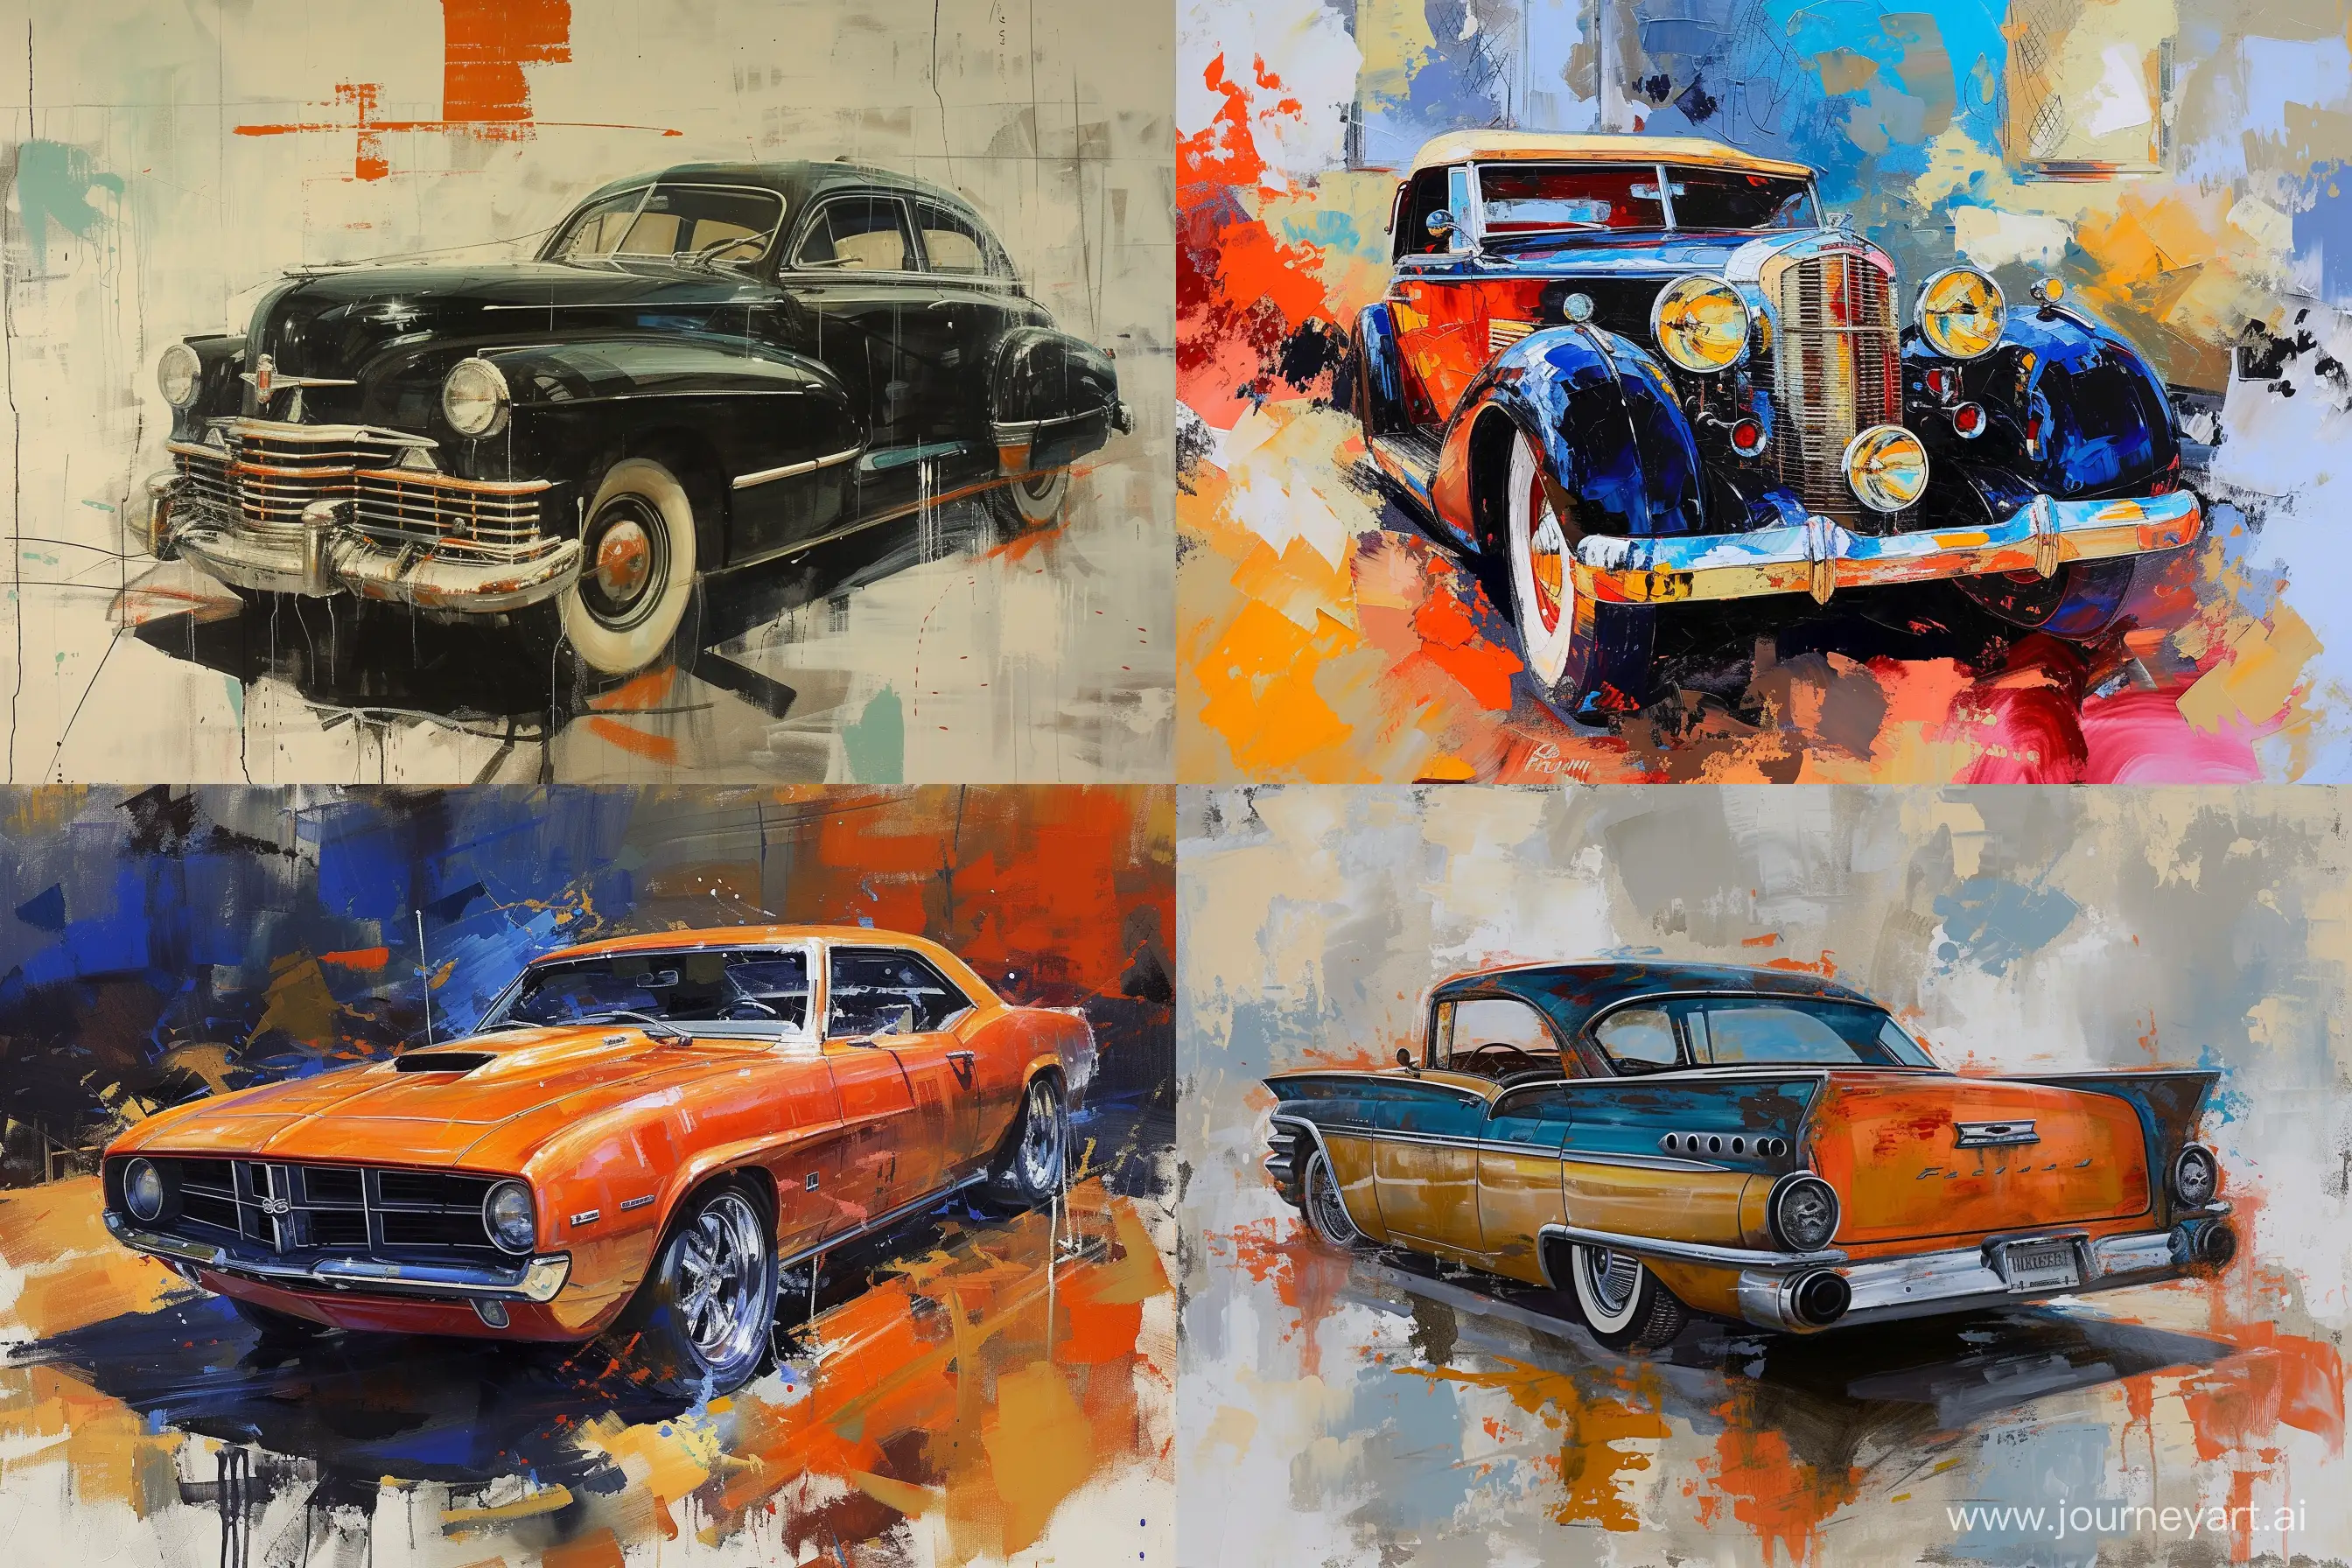 A painting of a classic car by Nicolai Fechin --v 6 --ar 3:2